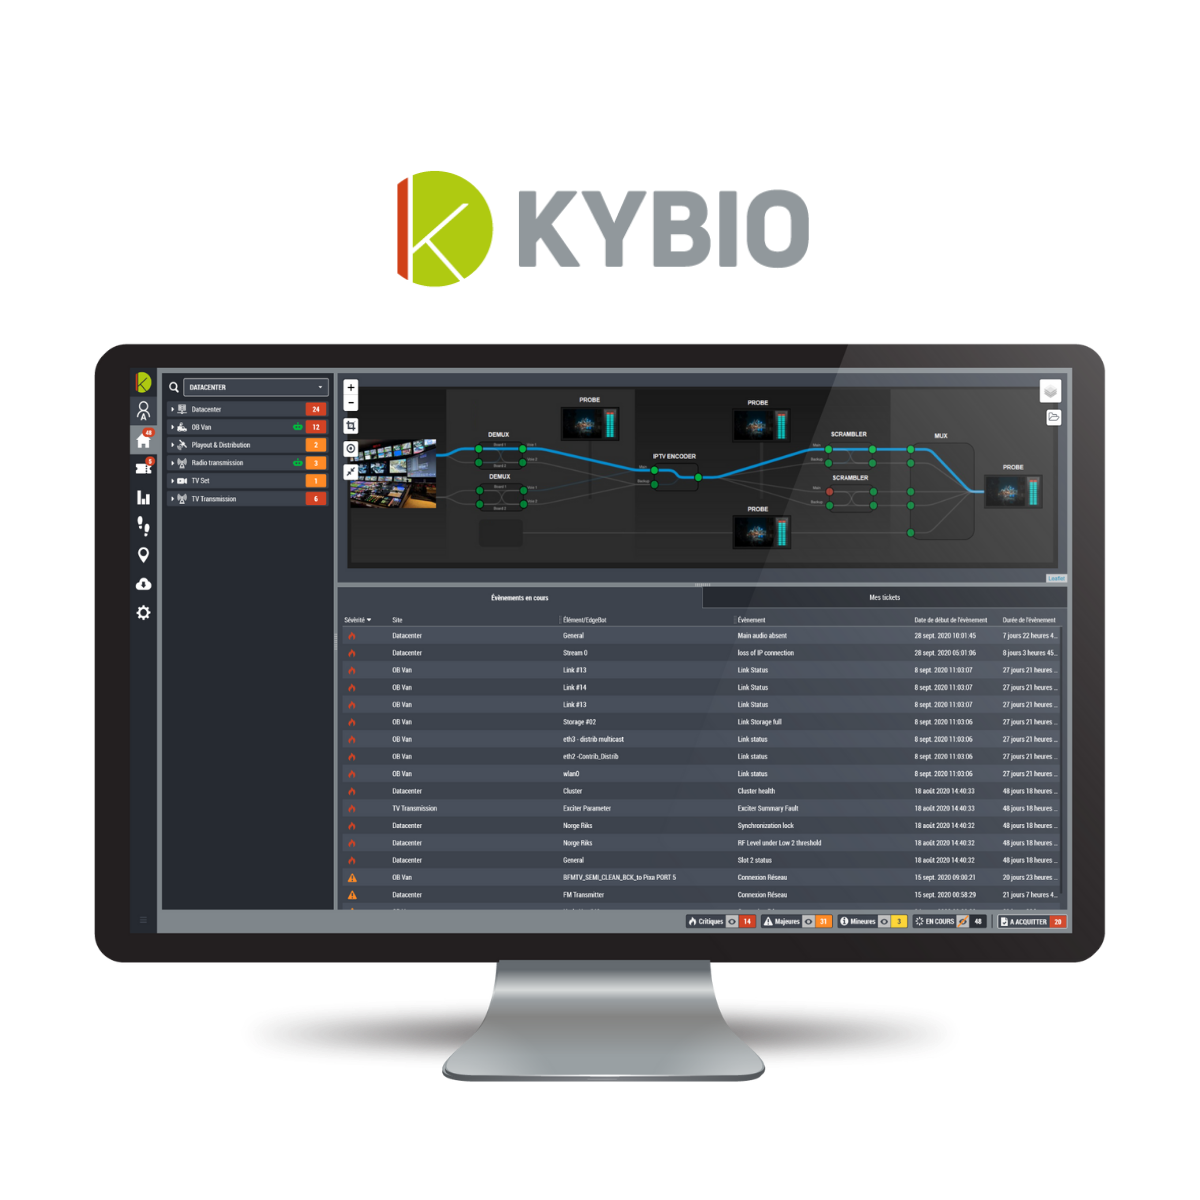 Kybio network management system